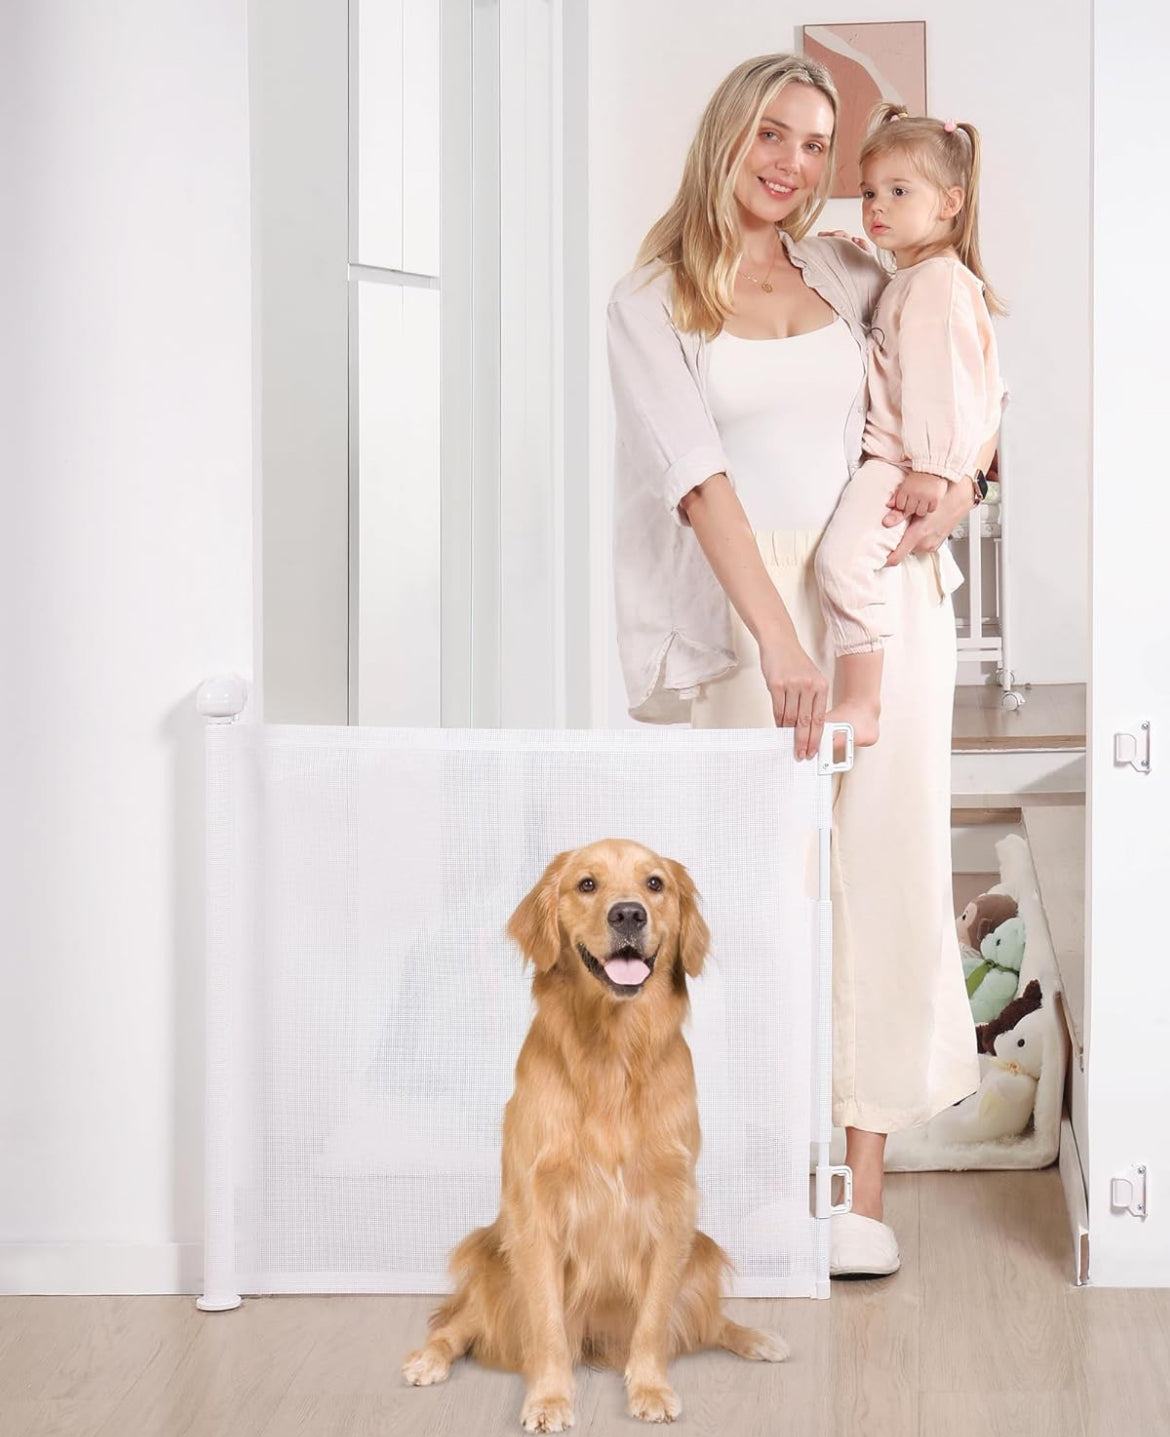 Likzest Retractable Baby Gate, Mesh Baby and Pet Gate 33" Tall, Extends up to 55" Wide, Child Safety Baby Gates for Stairs Doorways Hallways, Dog Gate Cat Gate for Indoor and Outdoor (White) - Selzalot